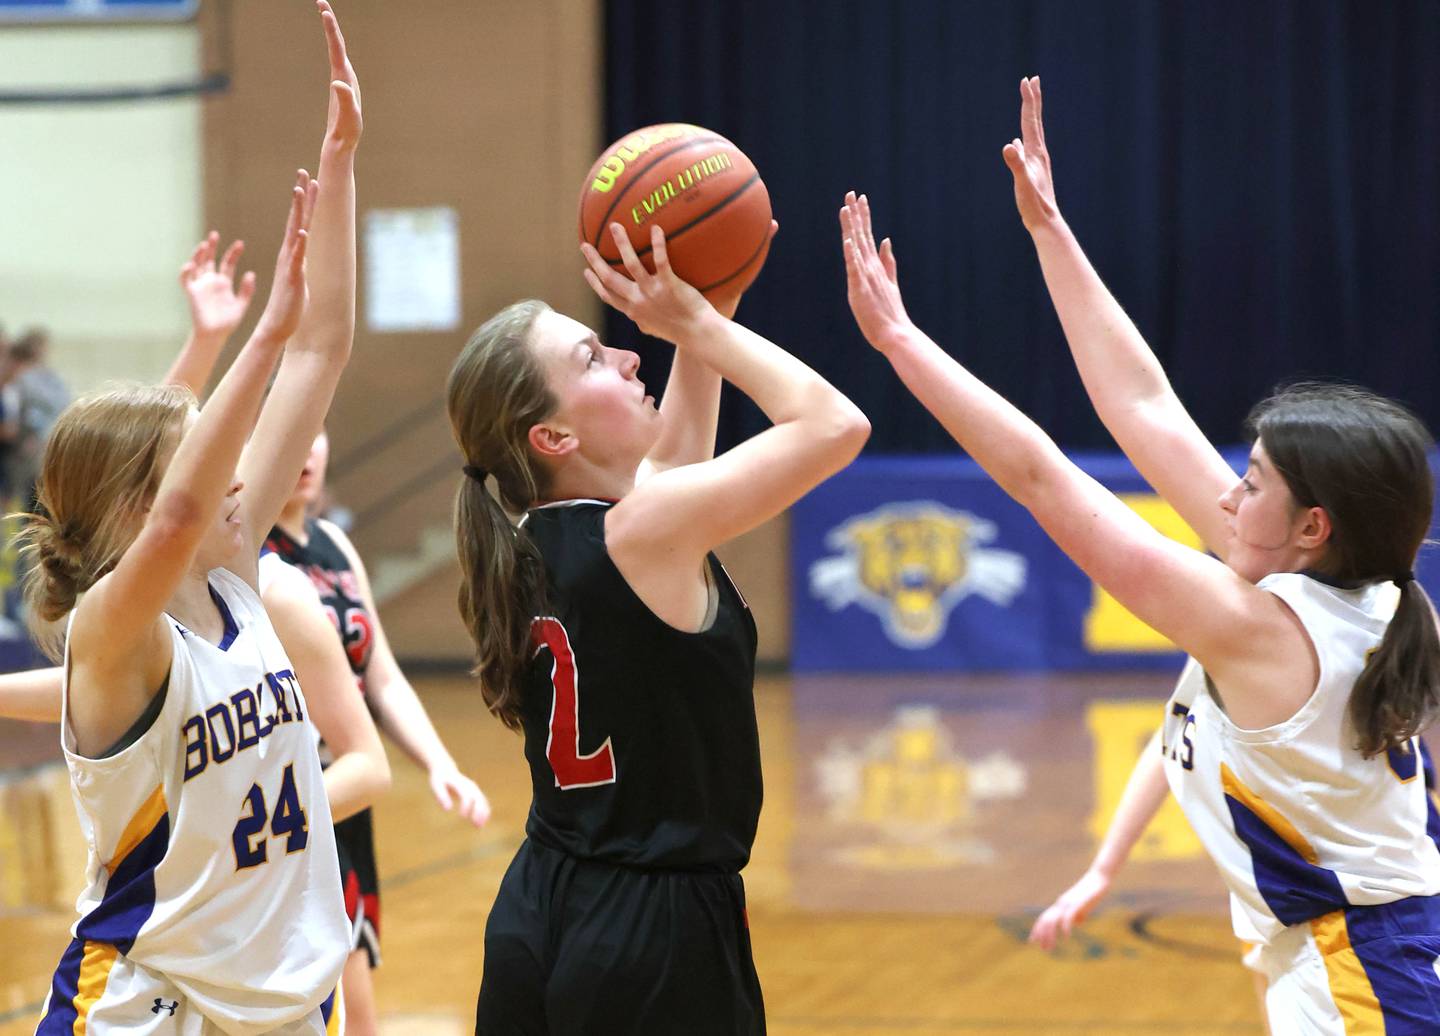 Indian Creek's Bethany Odle gets up a shot between two Somonauk defenders during their game Monday, Jan. 9, 2023, at Somonauk High School.